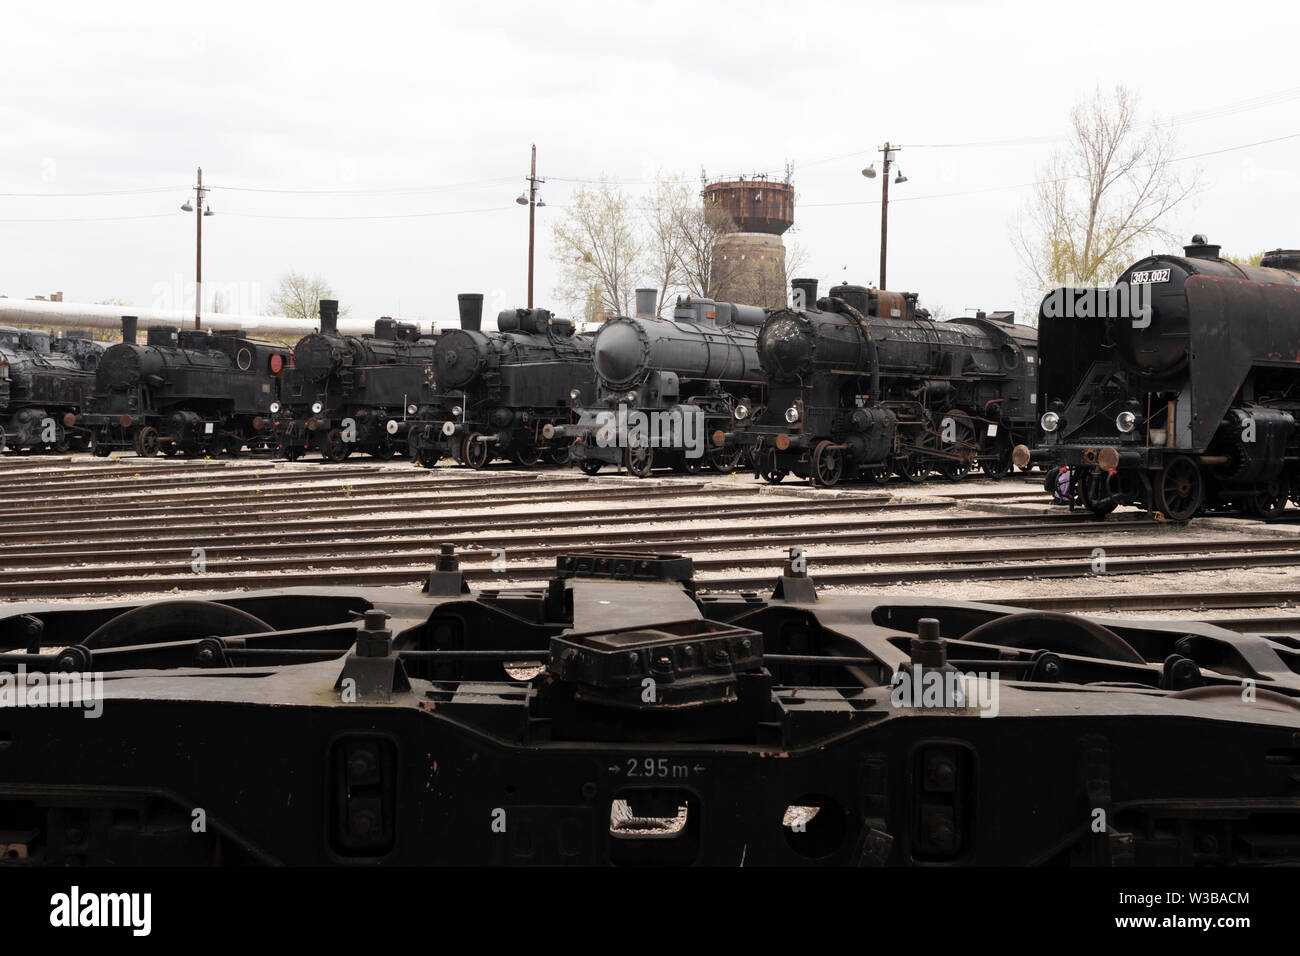 BUDAPEST, HUNGARY - April 05, 2019: Historic steam locomotives on display at the Hungarian Railway Museum. Undercarriage in foreground. Stock Photo